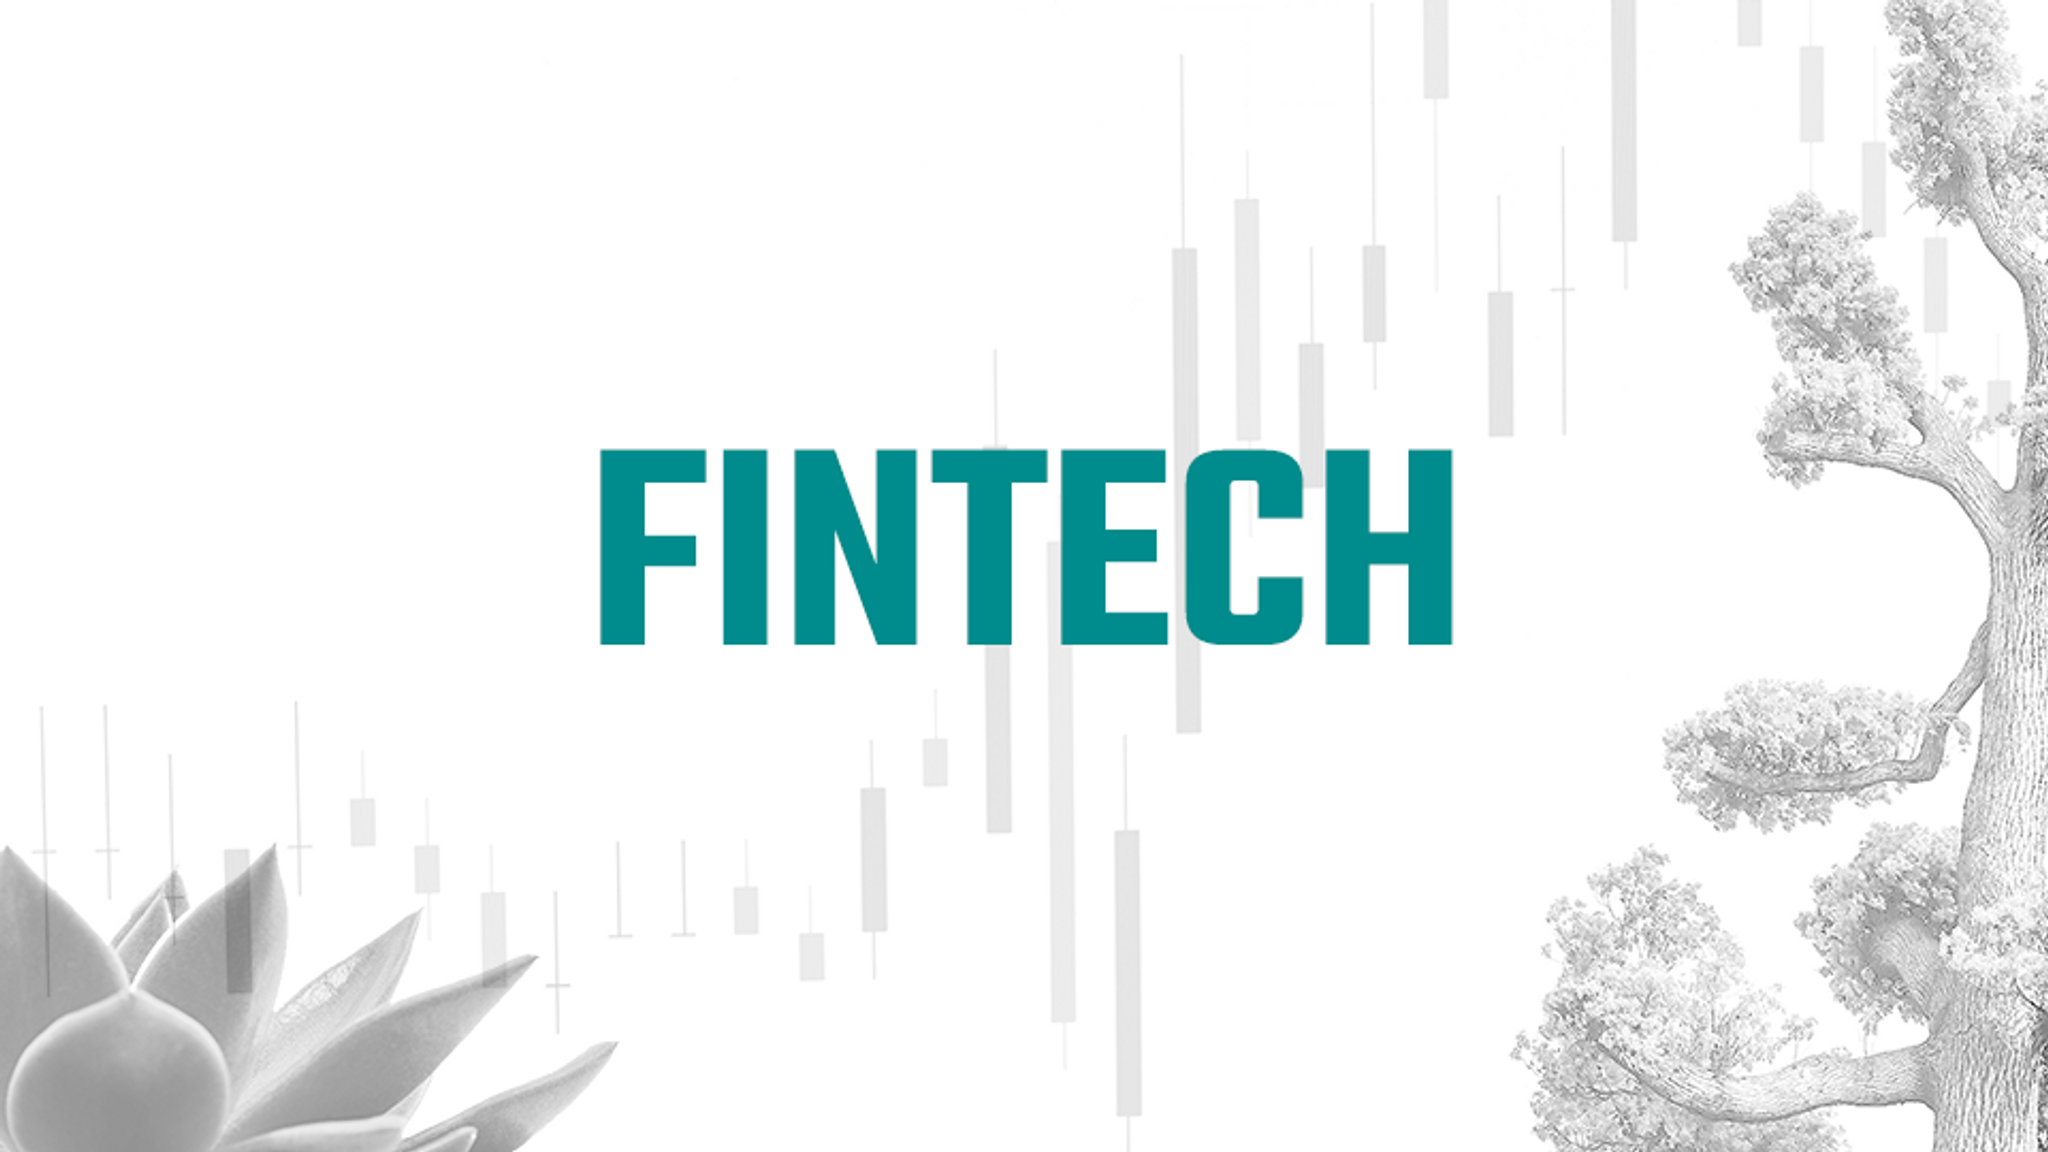 Our 3 Sustainable Fintech Fund Themes - What are they?